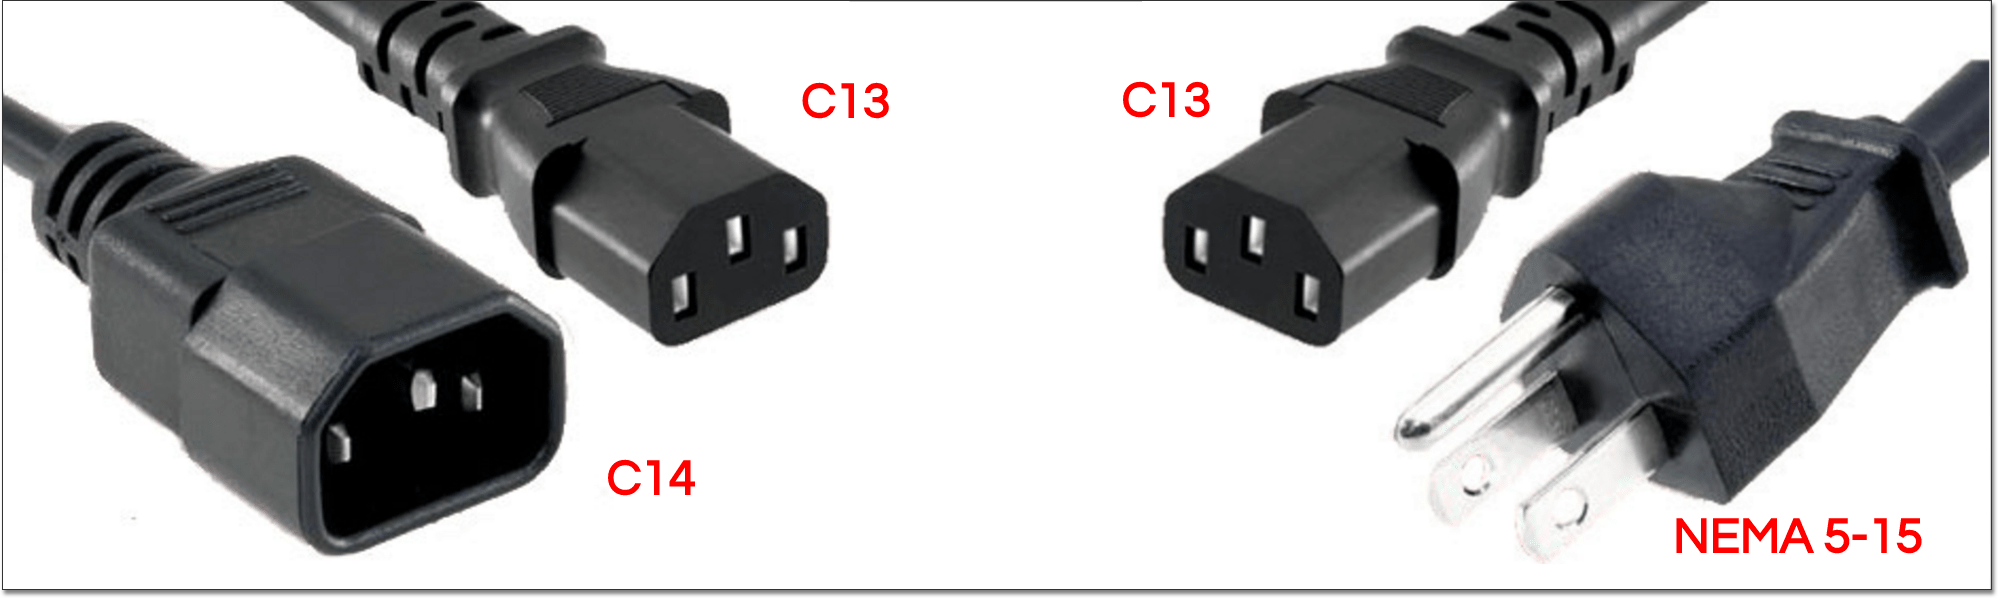 Image of a C14